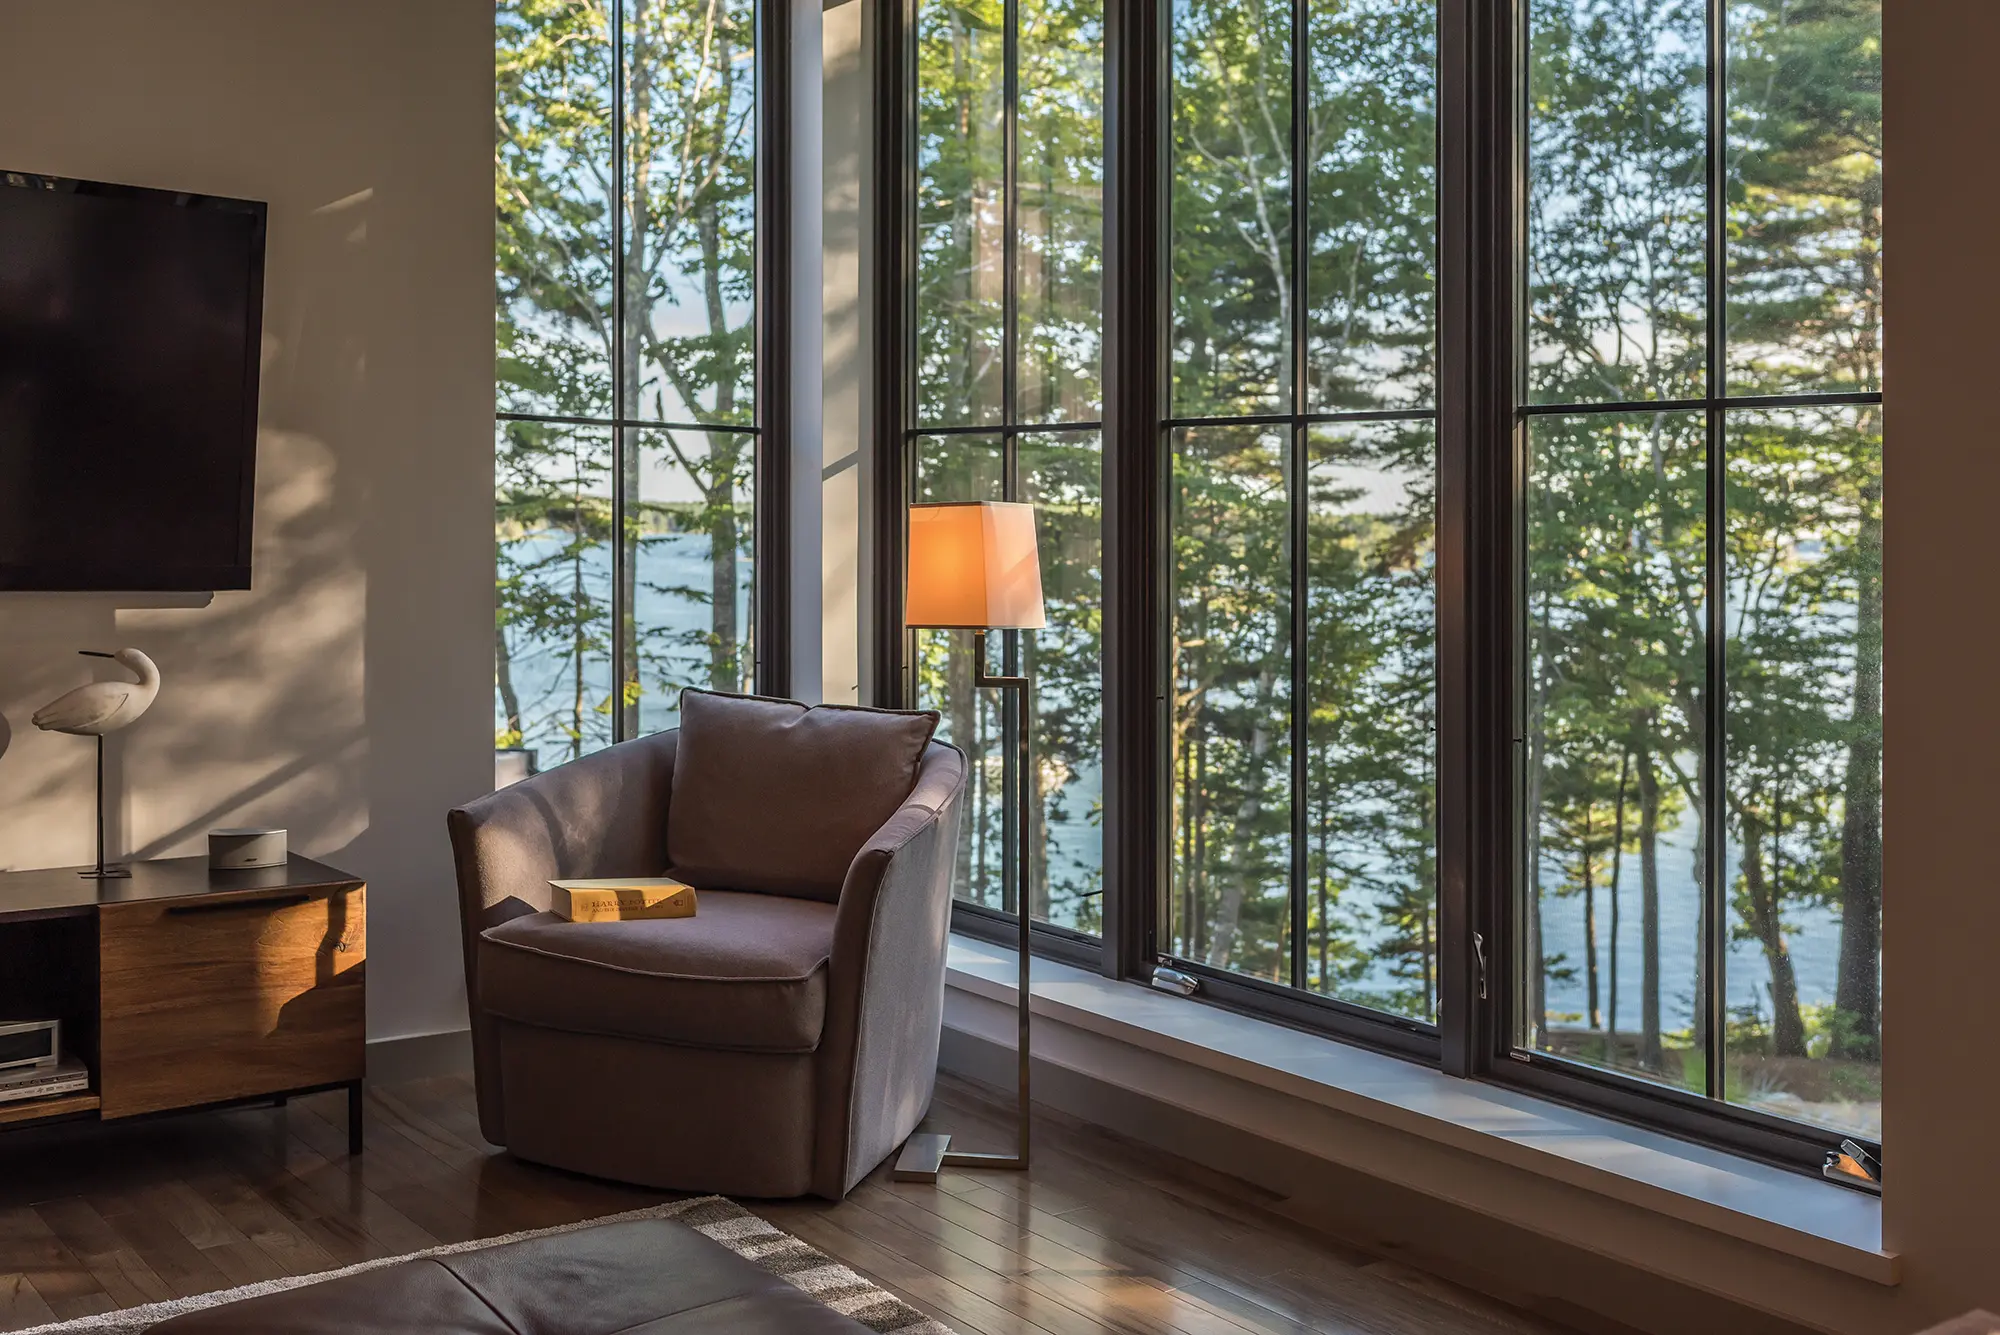 A cozy chair tucked by the large windows along the living room with views of the coast for miles - the perfect reading and relaxing spot.